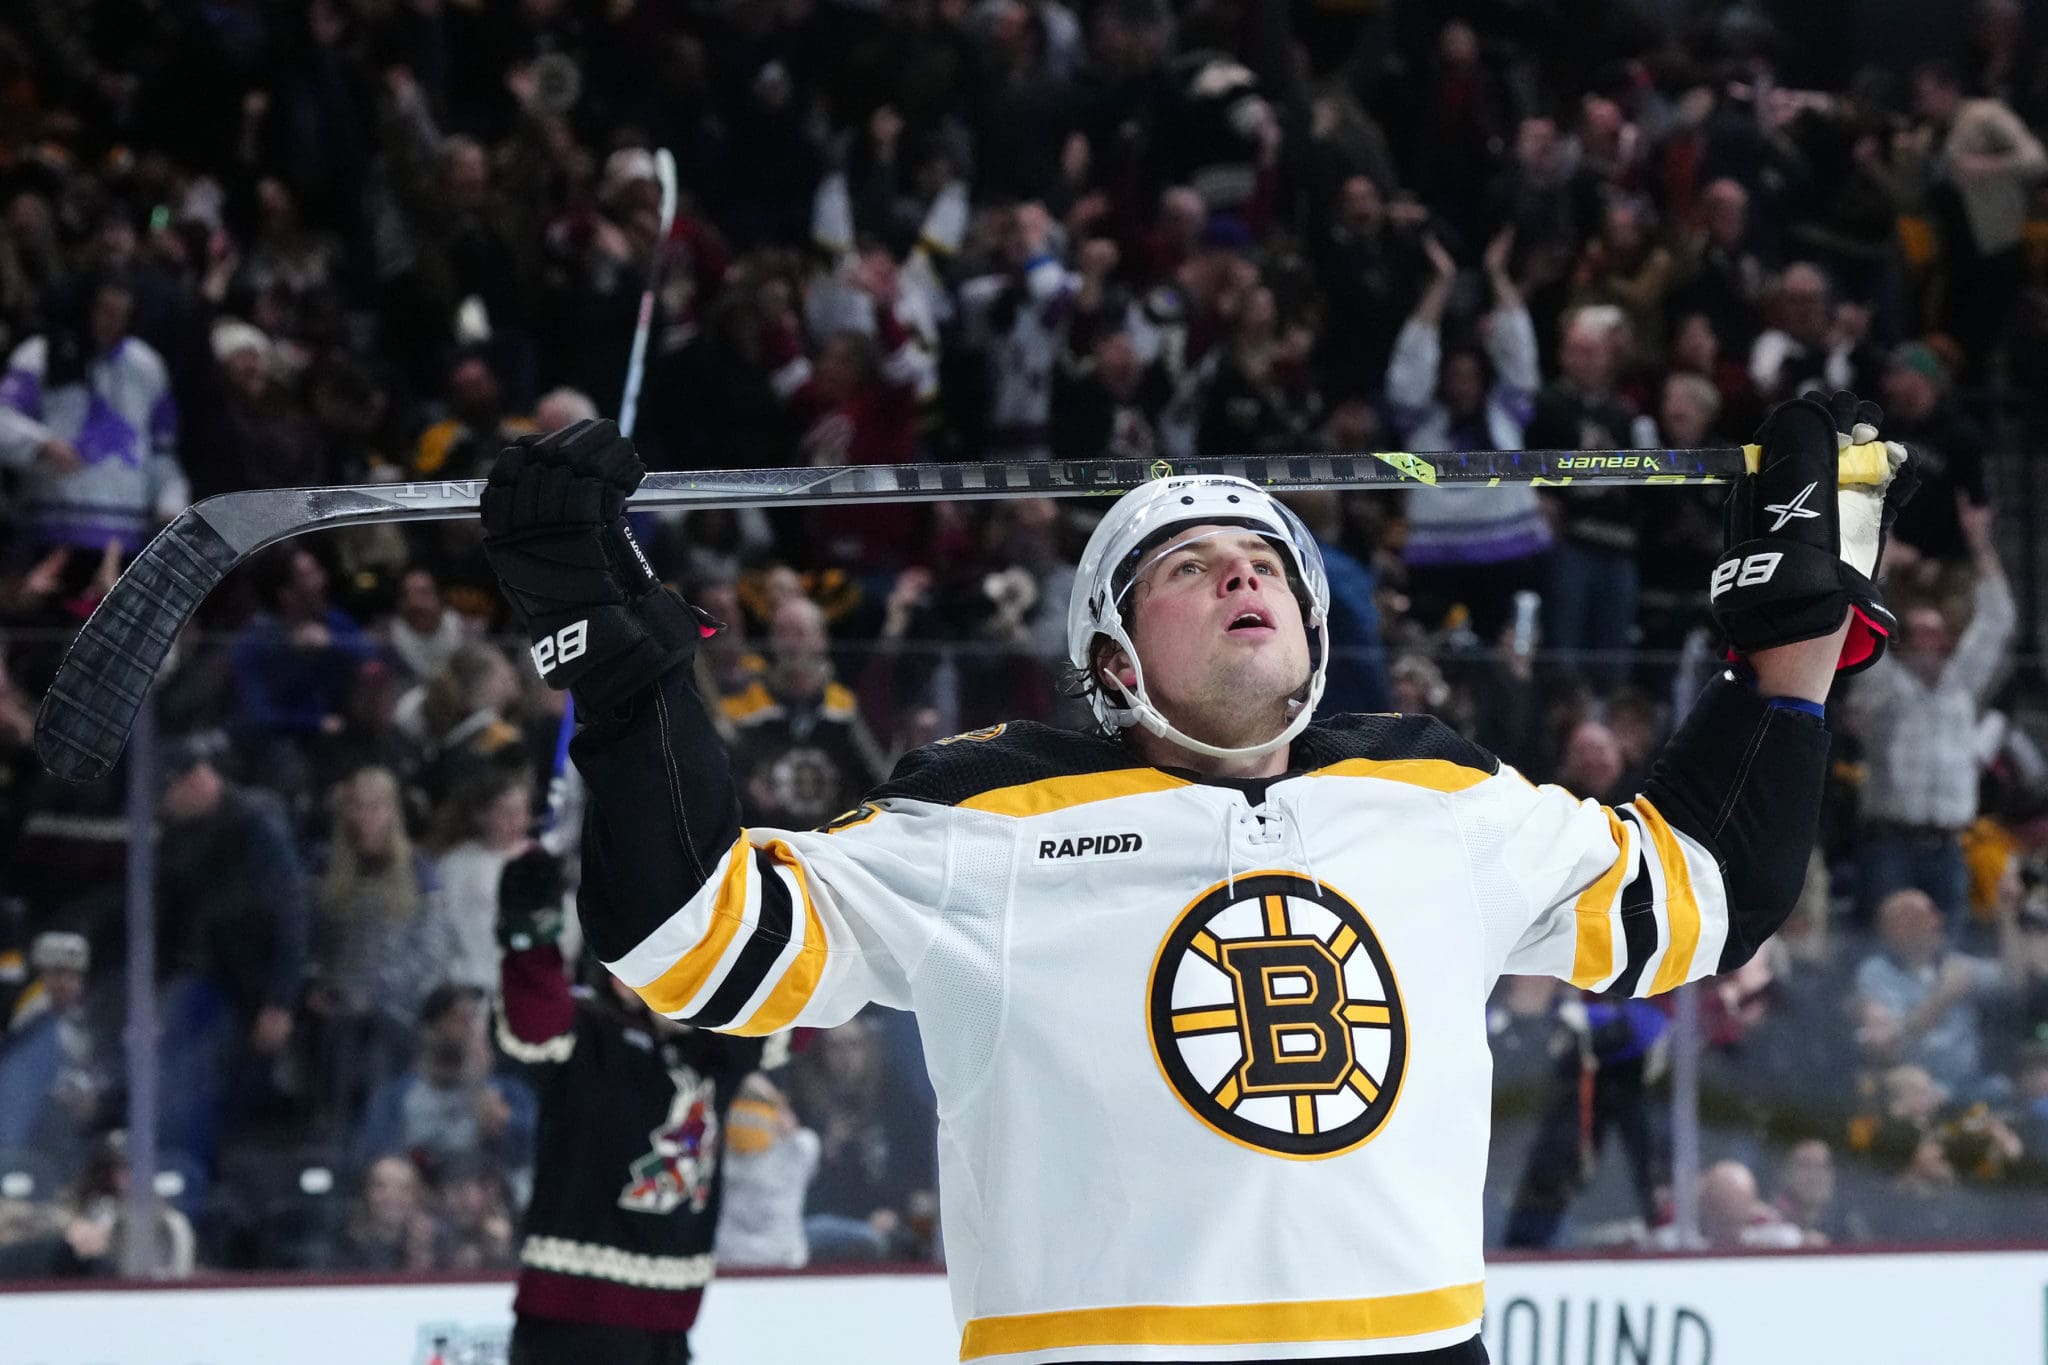 Boston Bruins on X: The Boston Bruins are proud to honor Dit